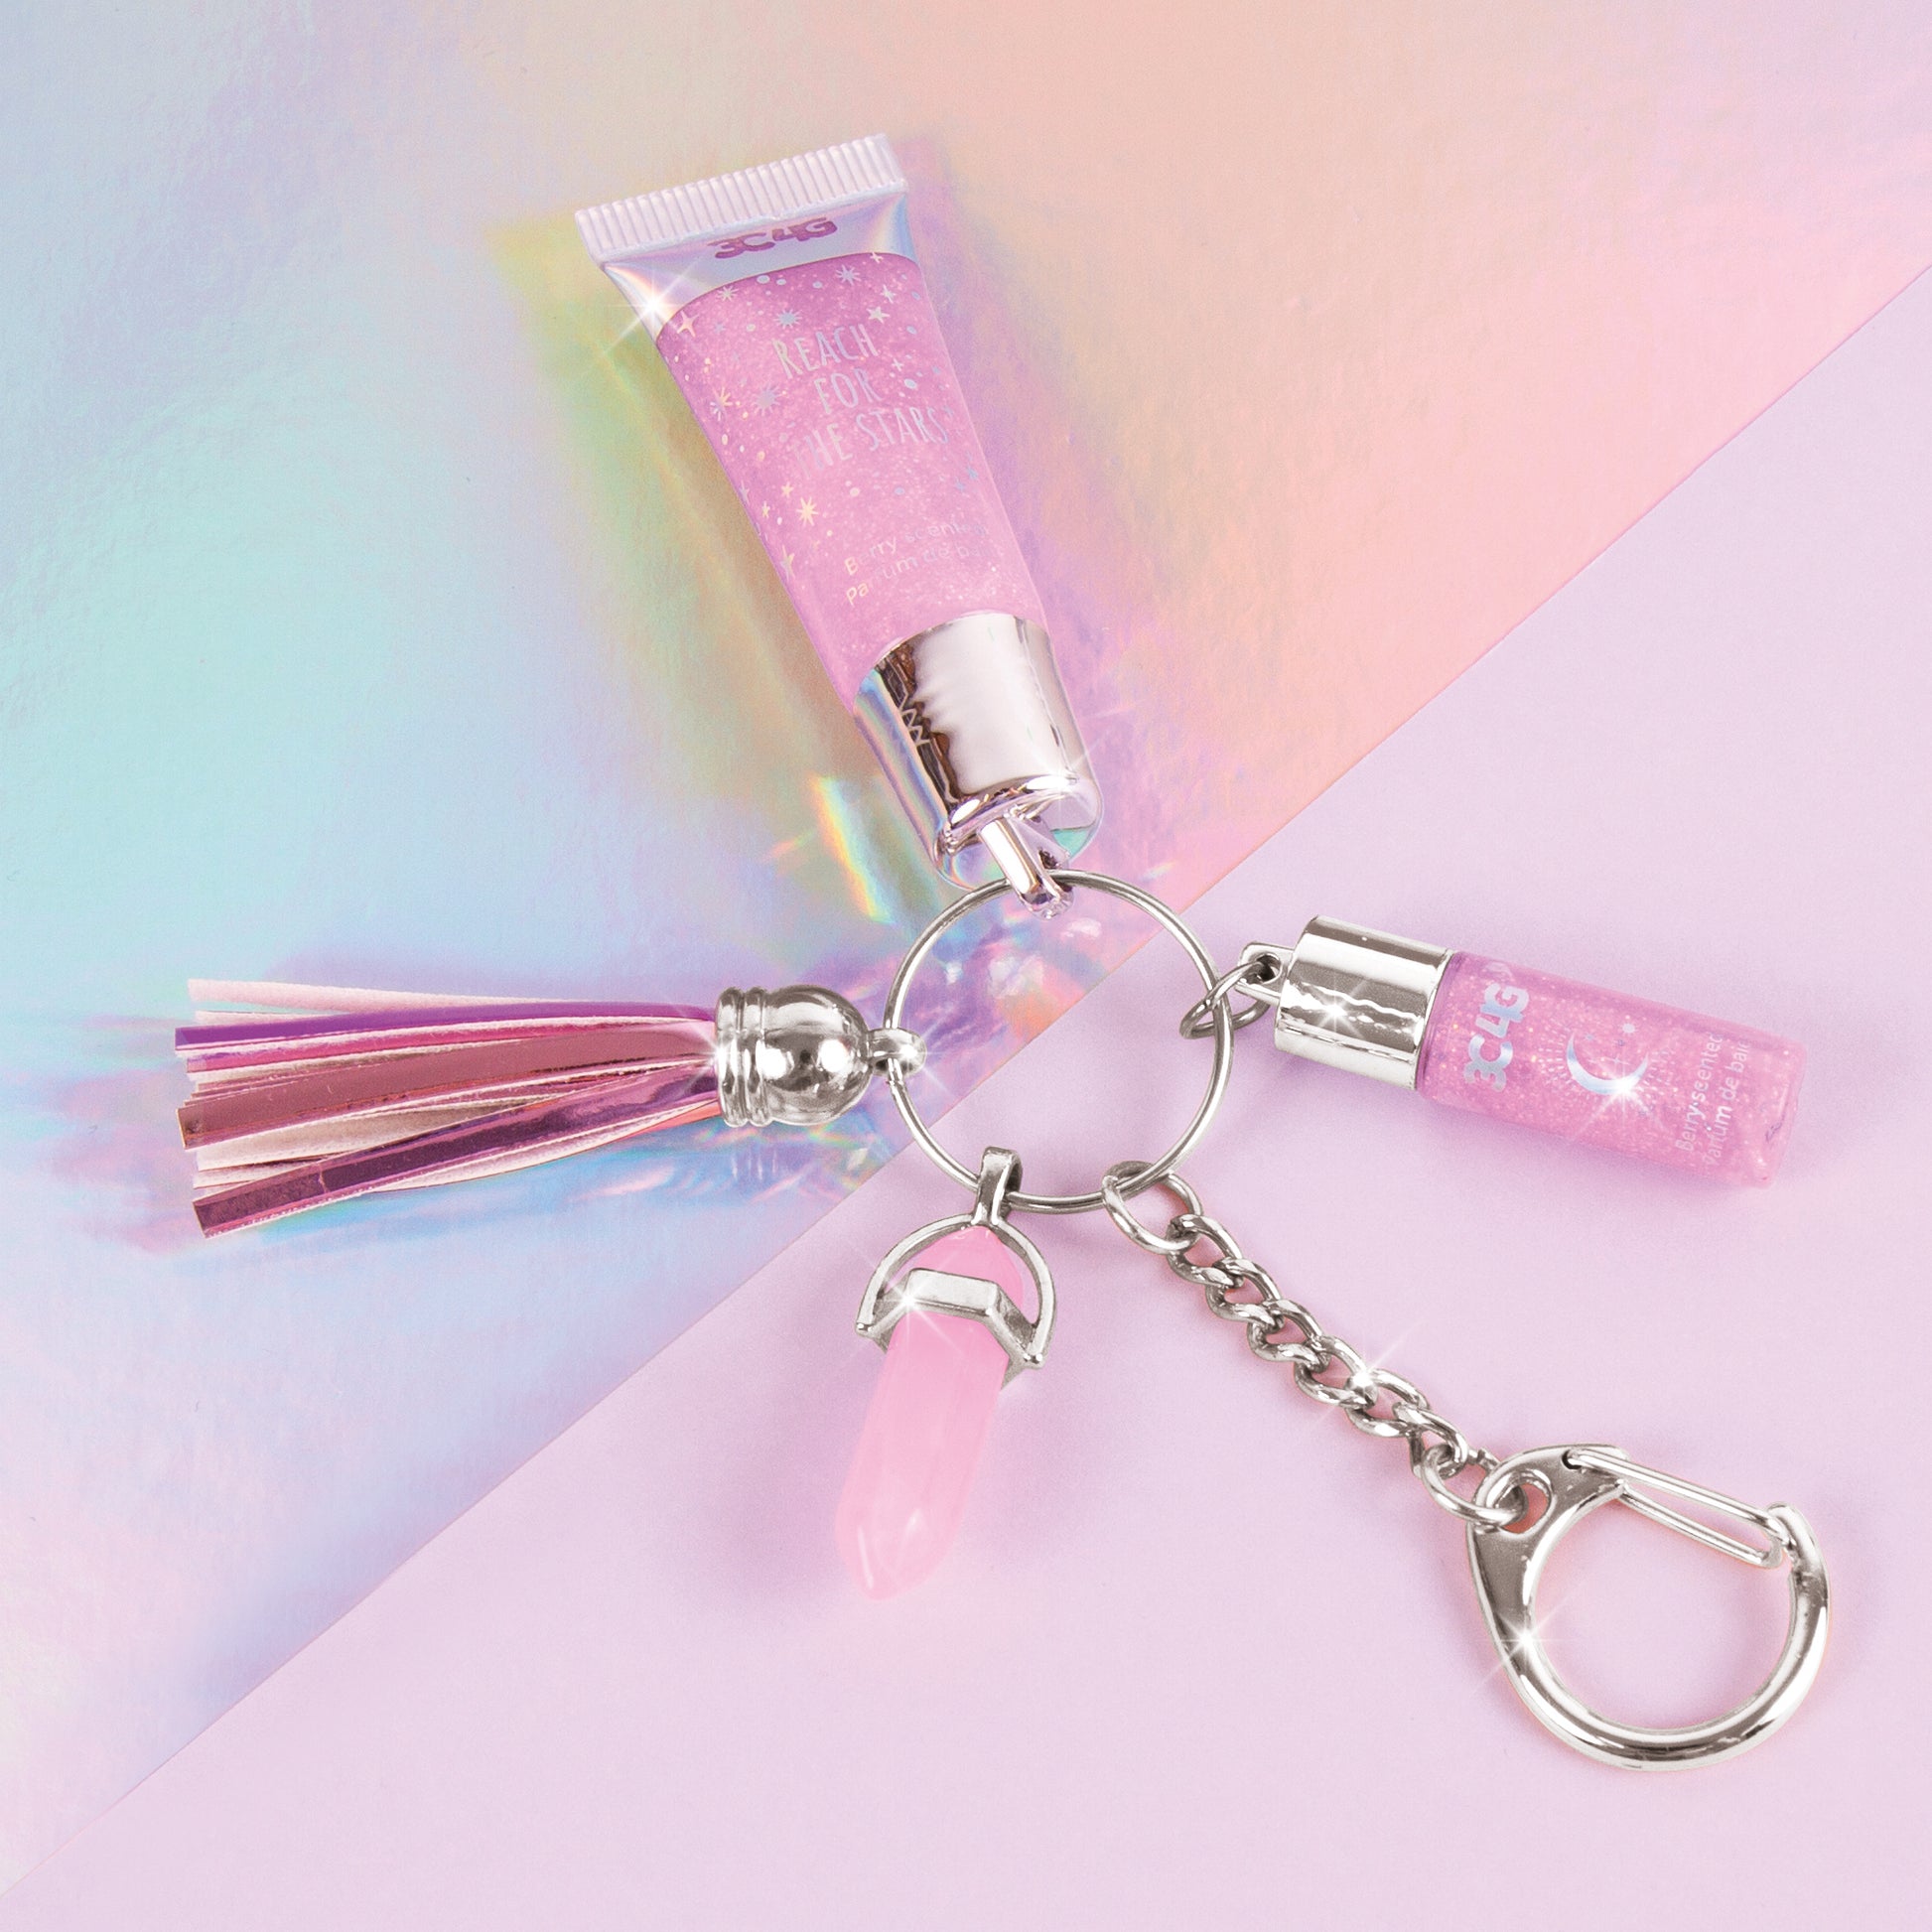 Makeup, Letter Key Ring With Clear Lip Gloss